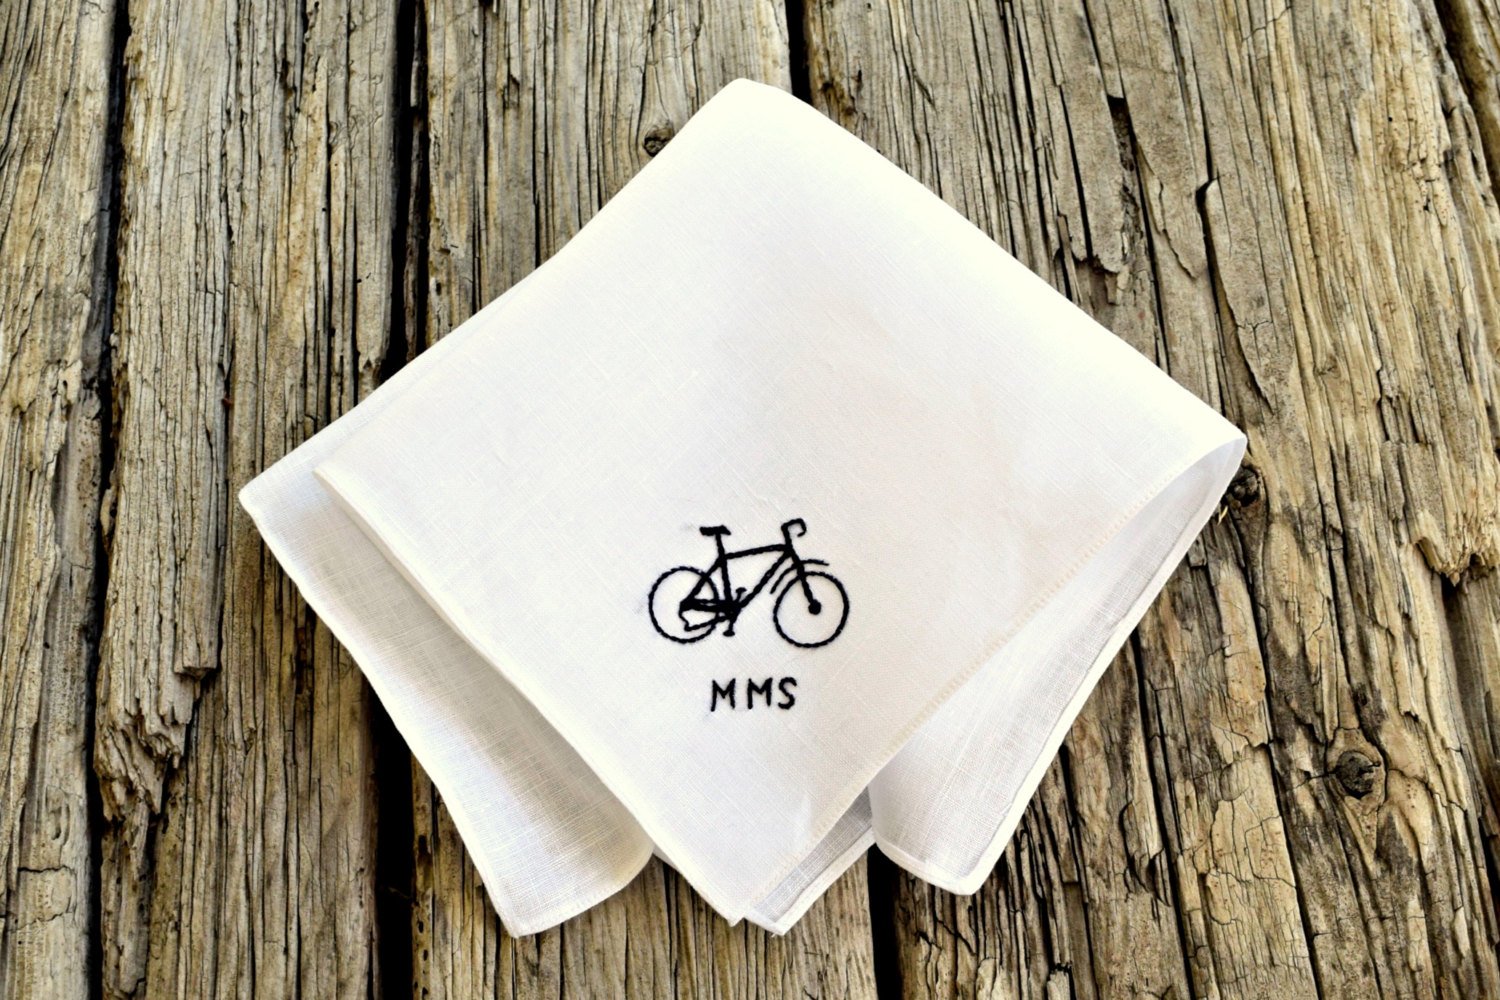 White linen handkerchief embroidered with small bicycle silhouette and the initials MMS in black